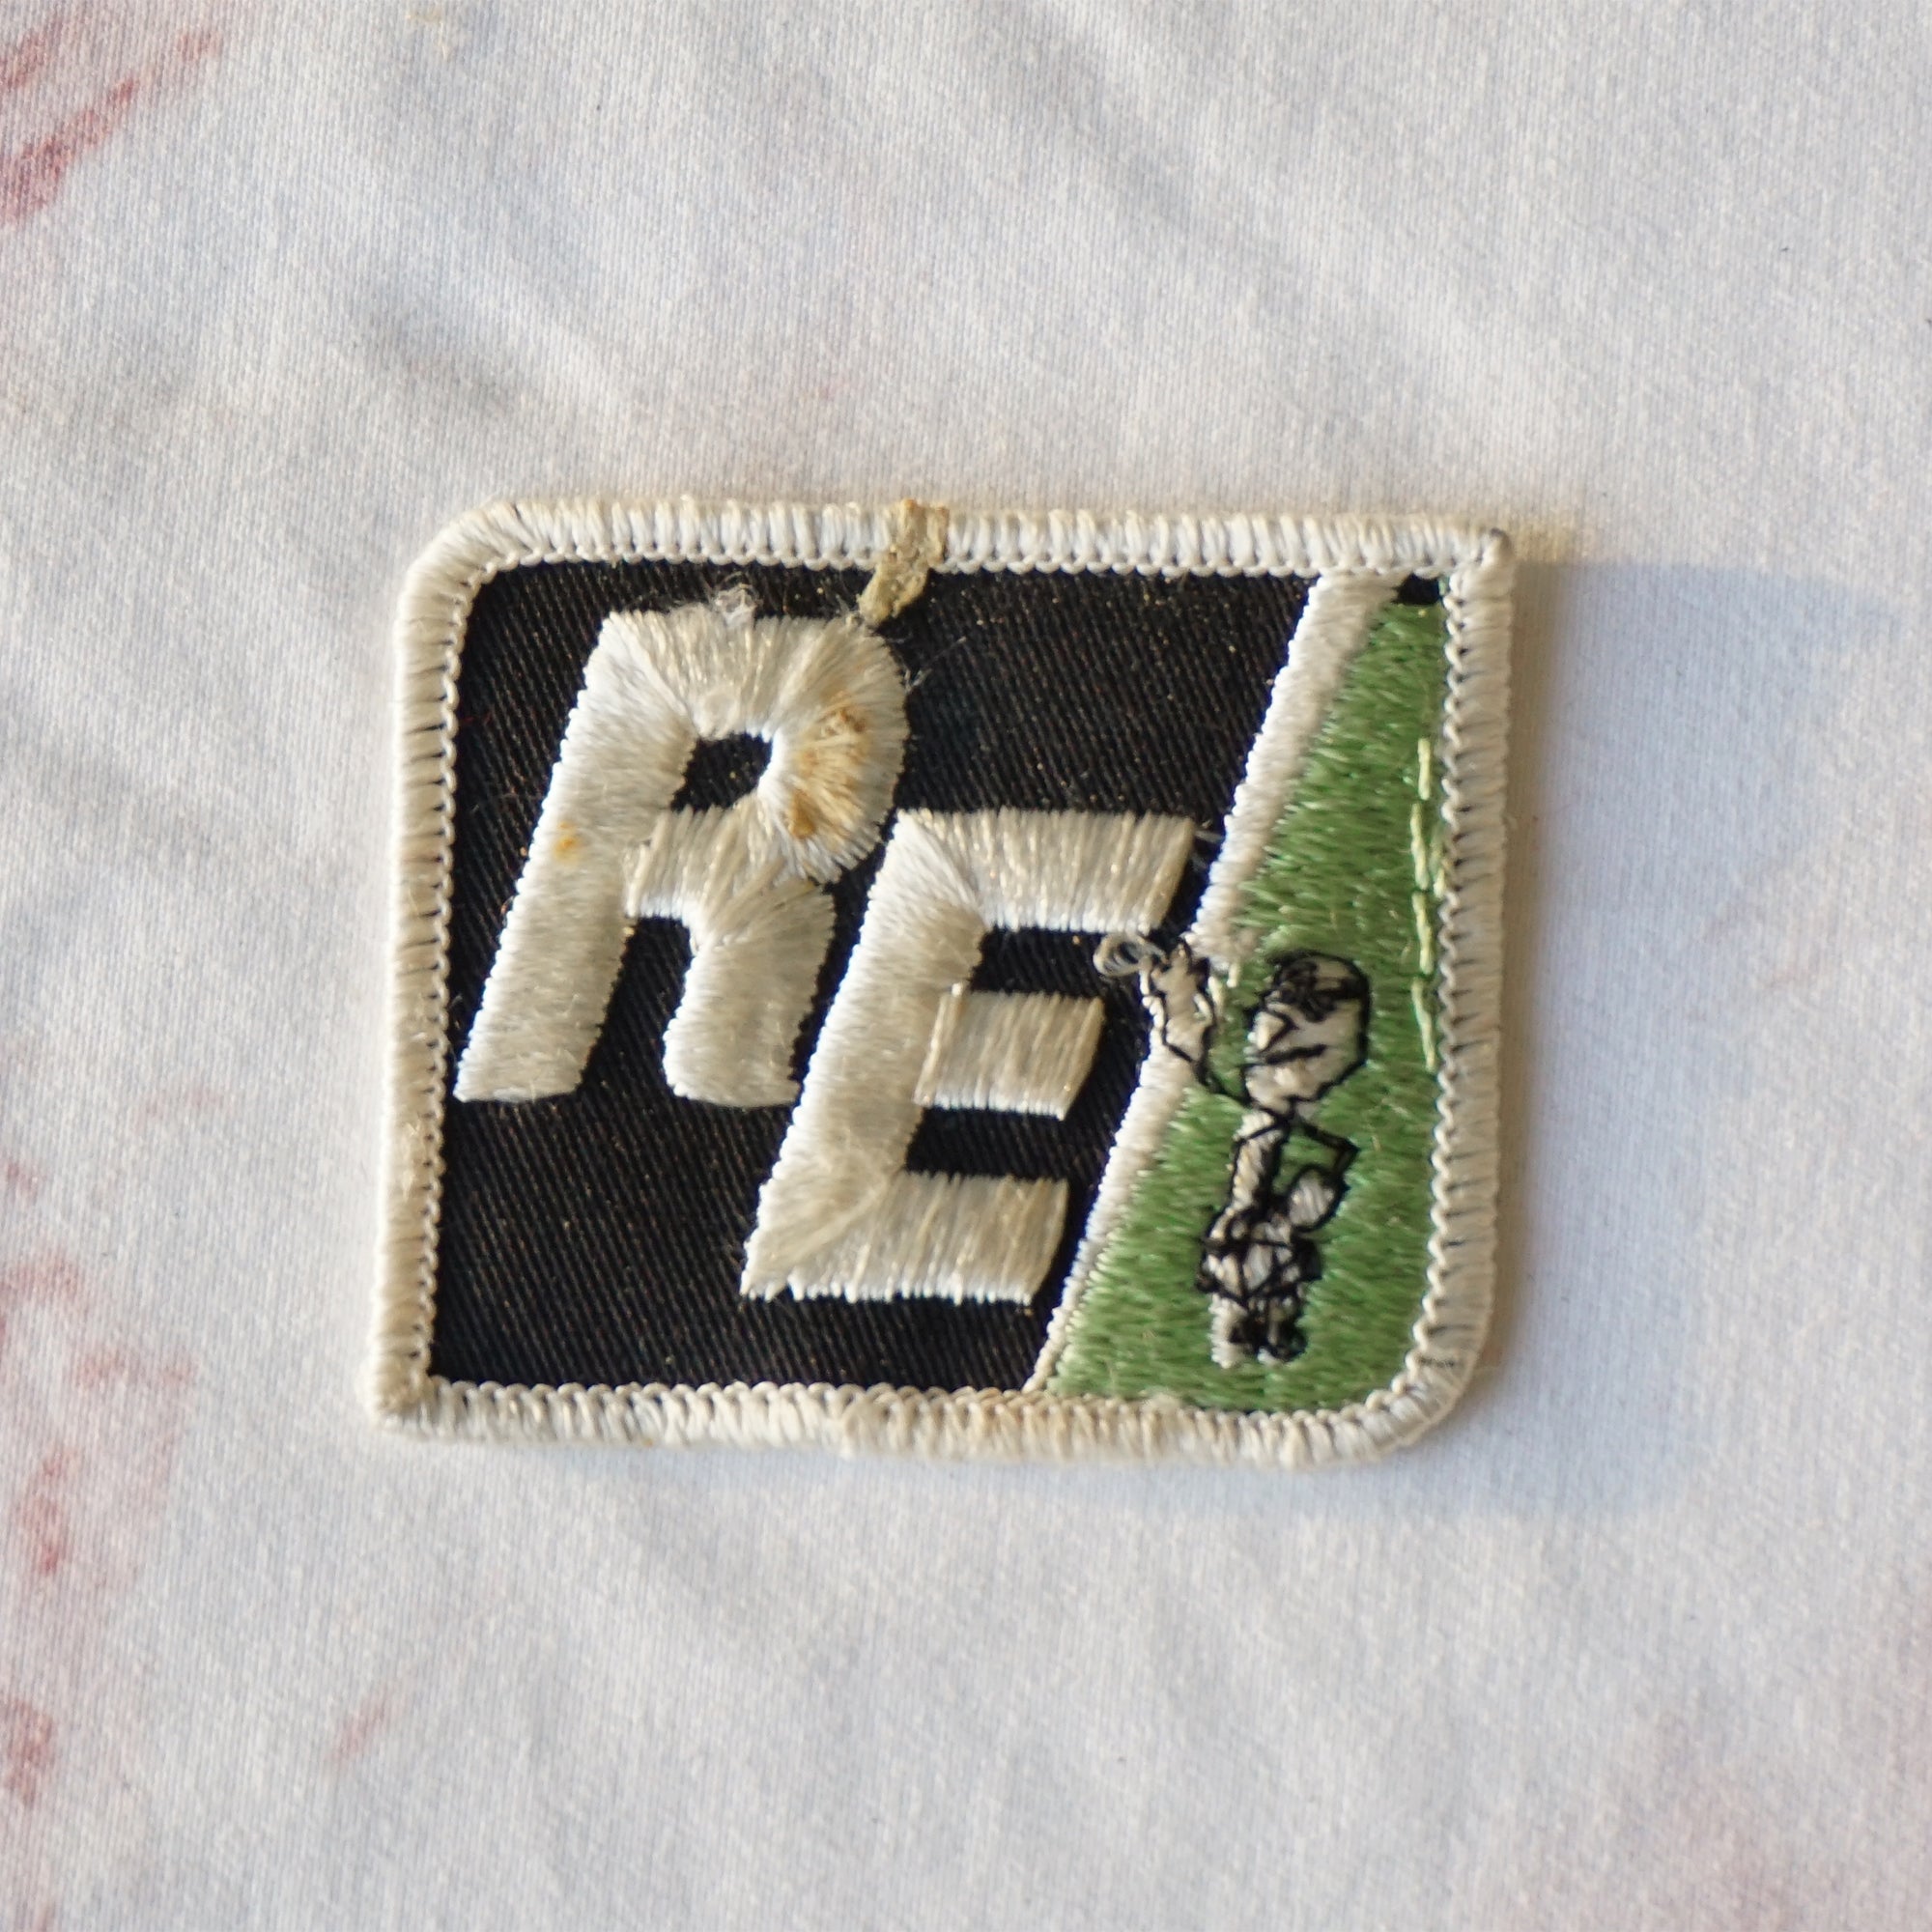 1980s Vintage 2.25" RE Rural Electric Clothing Patch with Lightning and Person. Black, White and Green Colors.